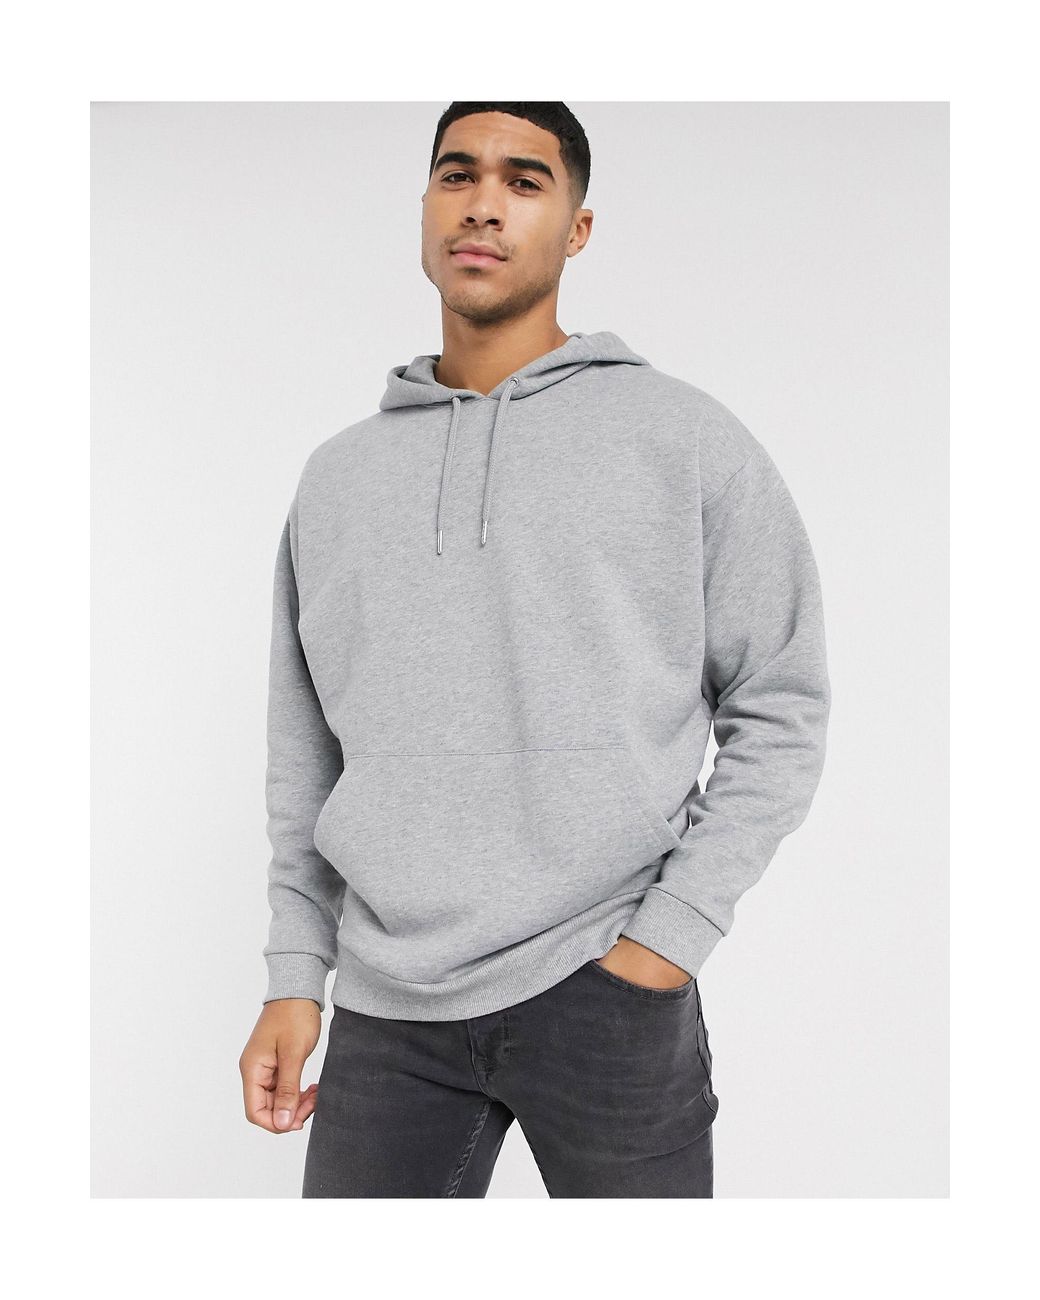 ASOS Cotton Oversized Hoodie in Grey Marle (Grey) for Men - Lyst